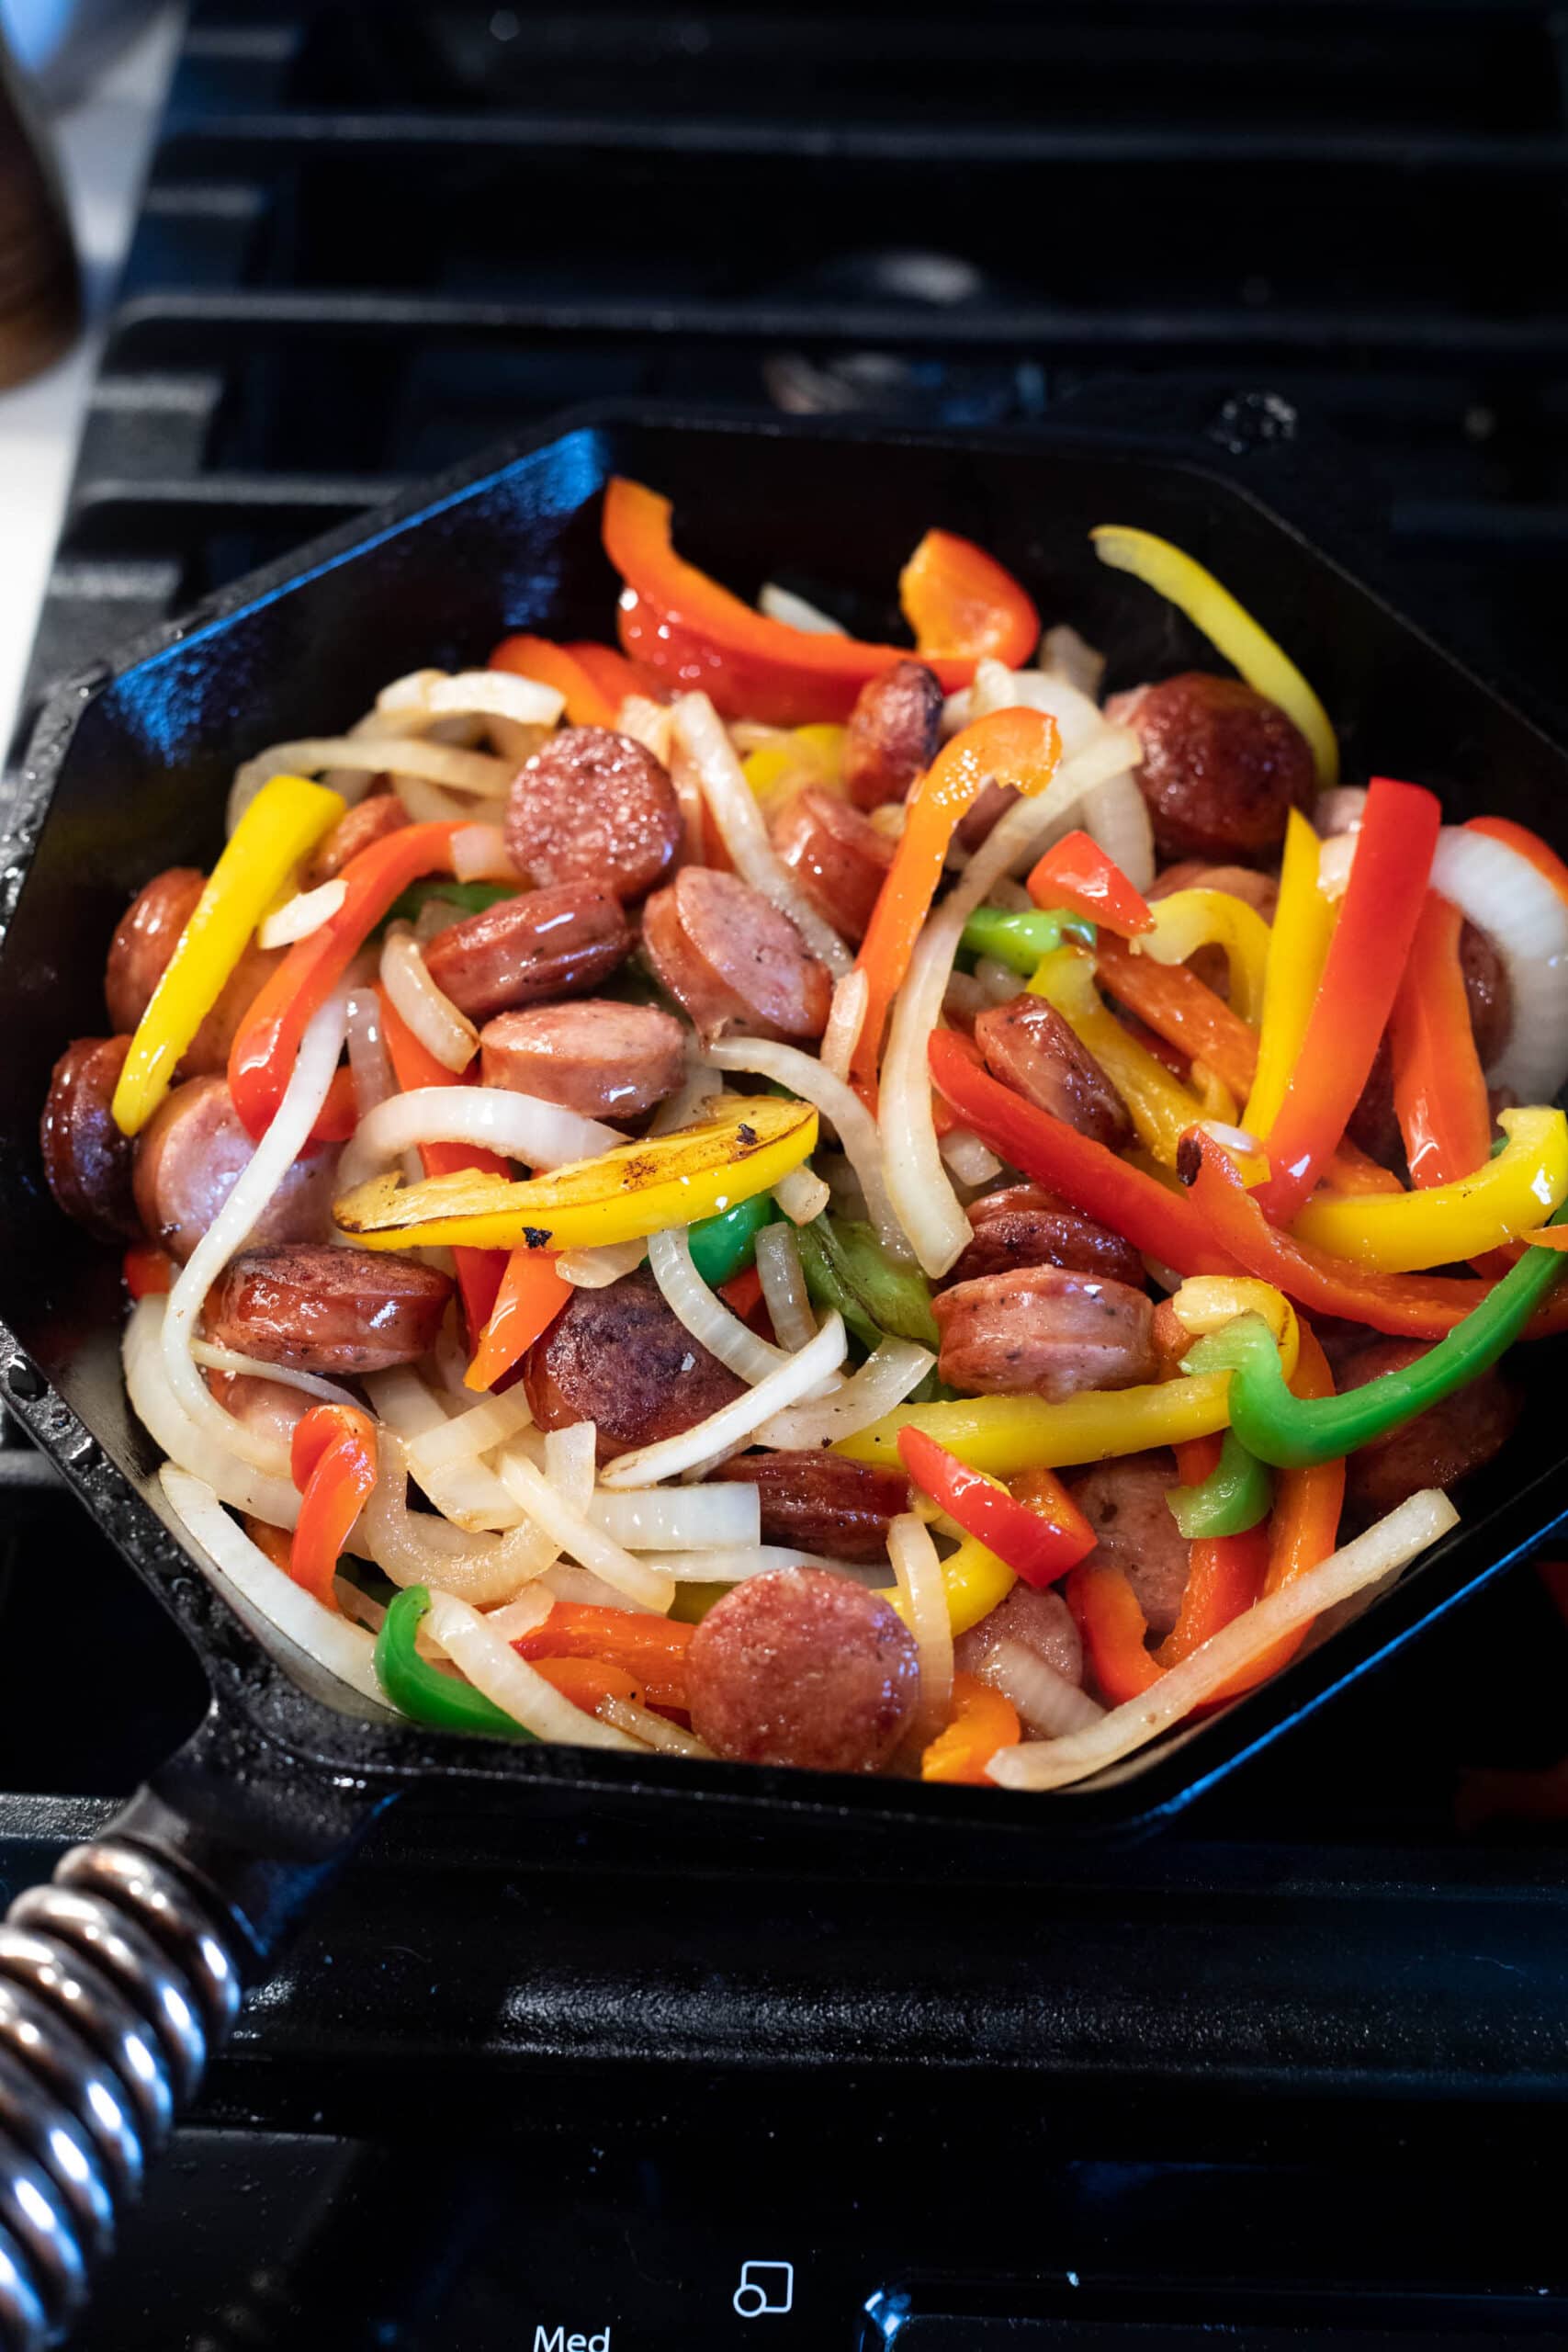 Cast iron skillet filled with peppers onions and sausage